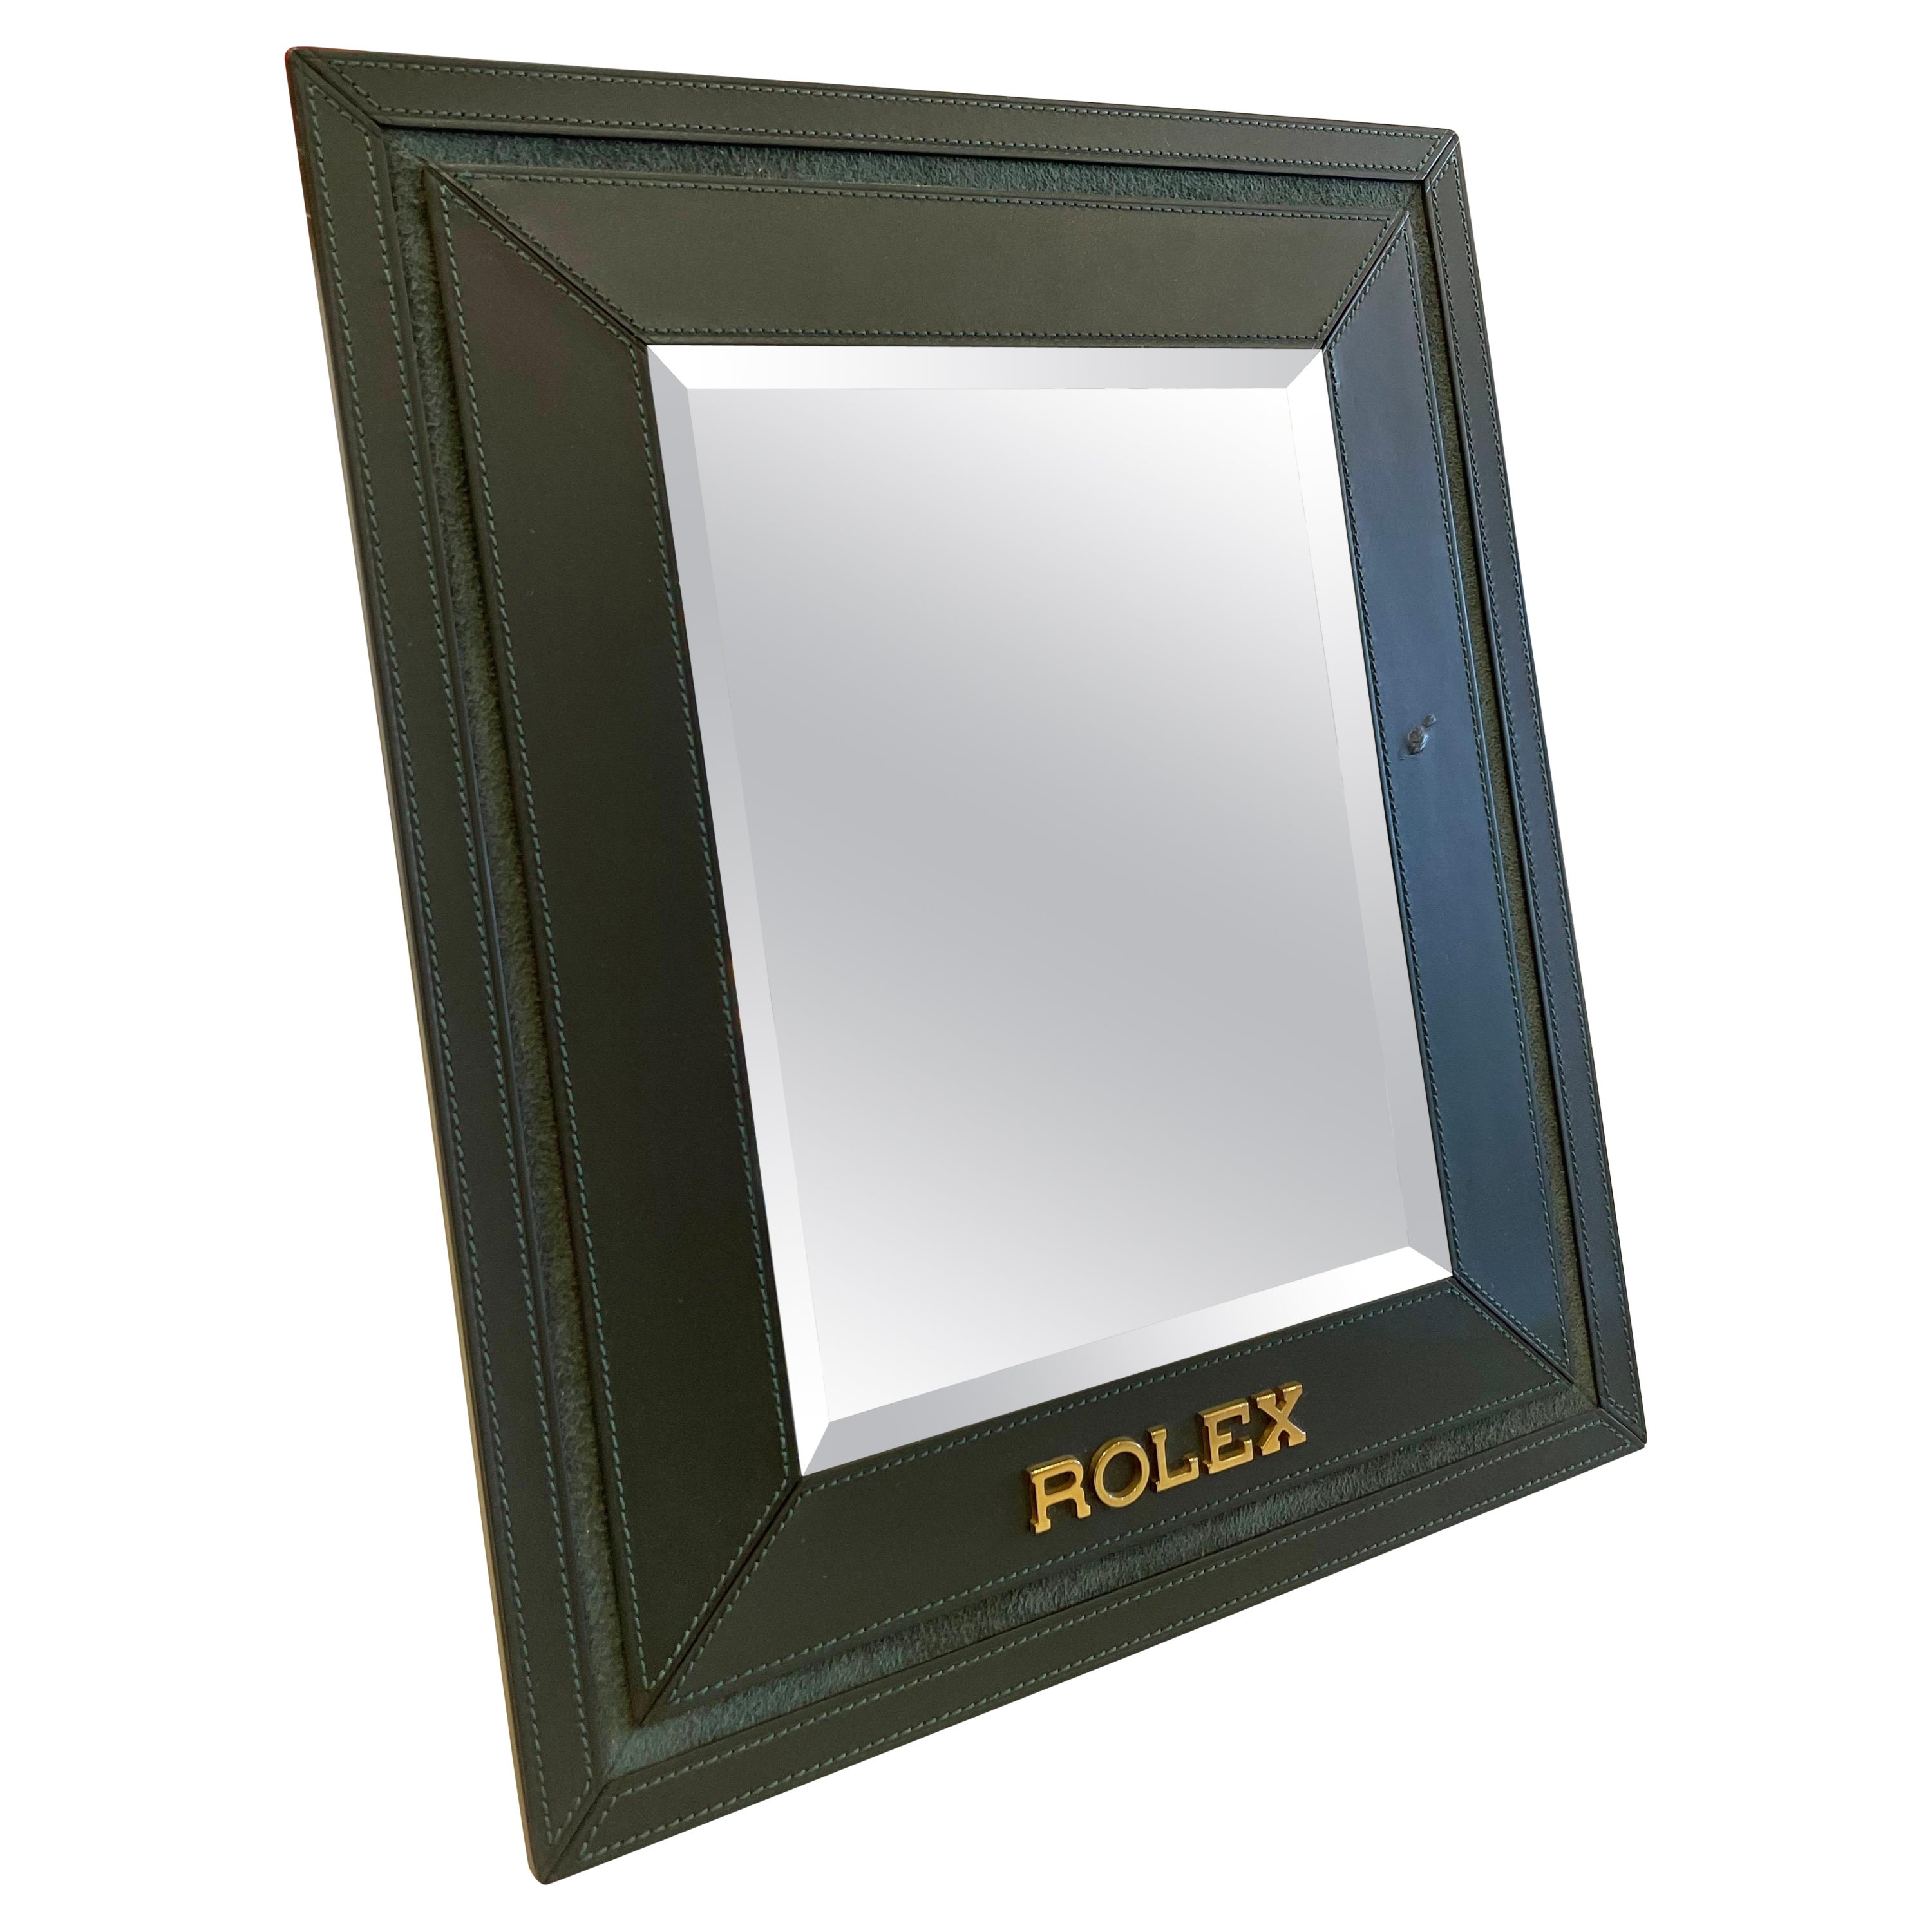 Original Vintage Rolex Swiss-Made Green Stitched Leather Display Mirror For Sale